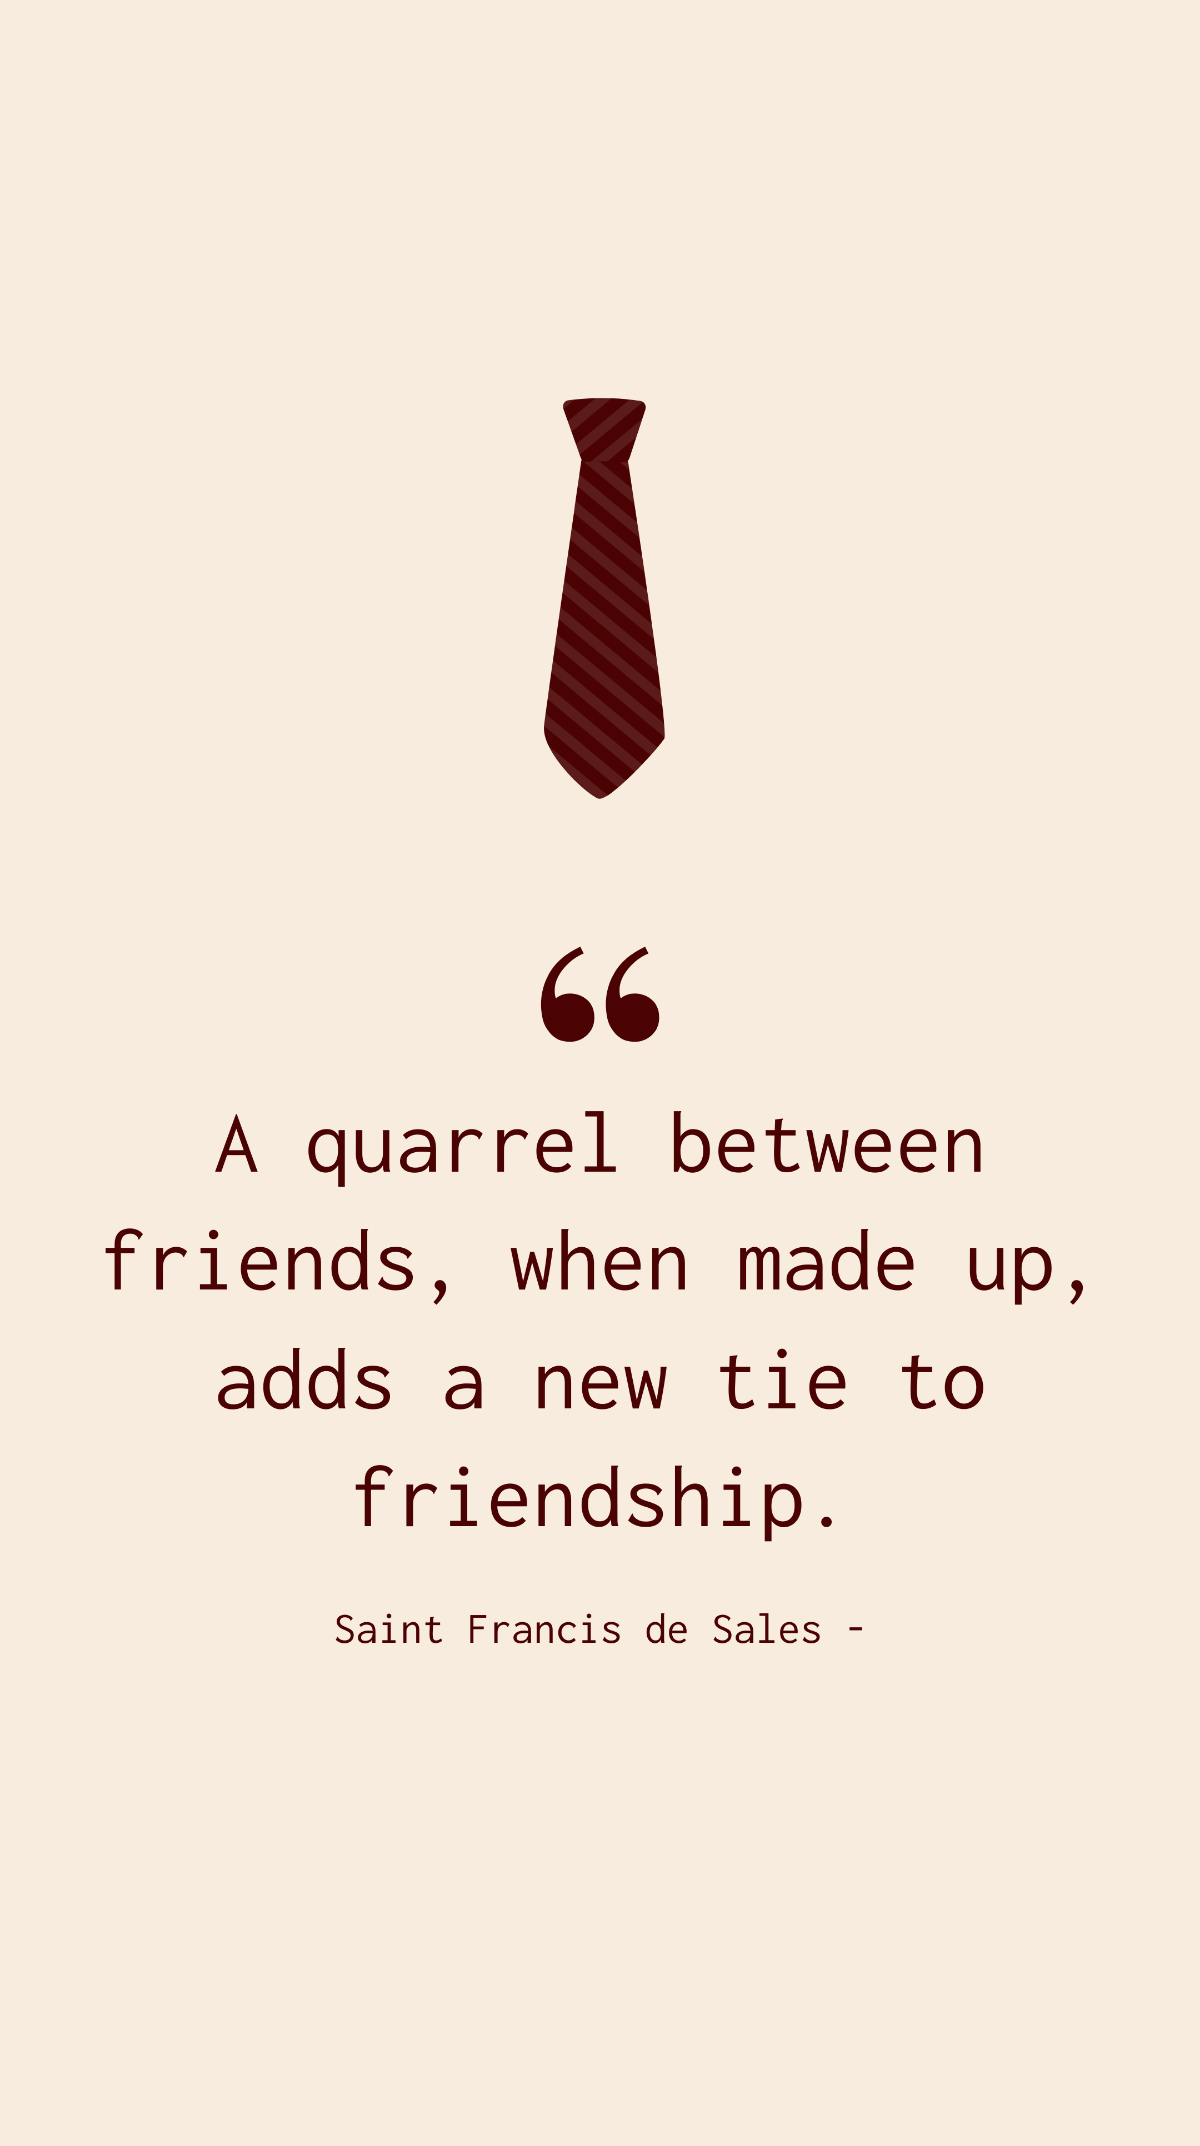 Saint Francis de Sales - A quarrel between friends, when made up, adds a new tie to friendship. Template